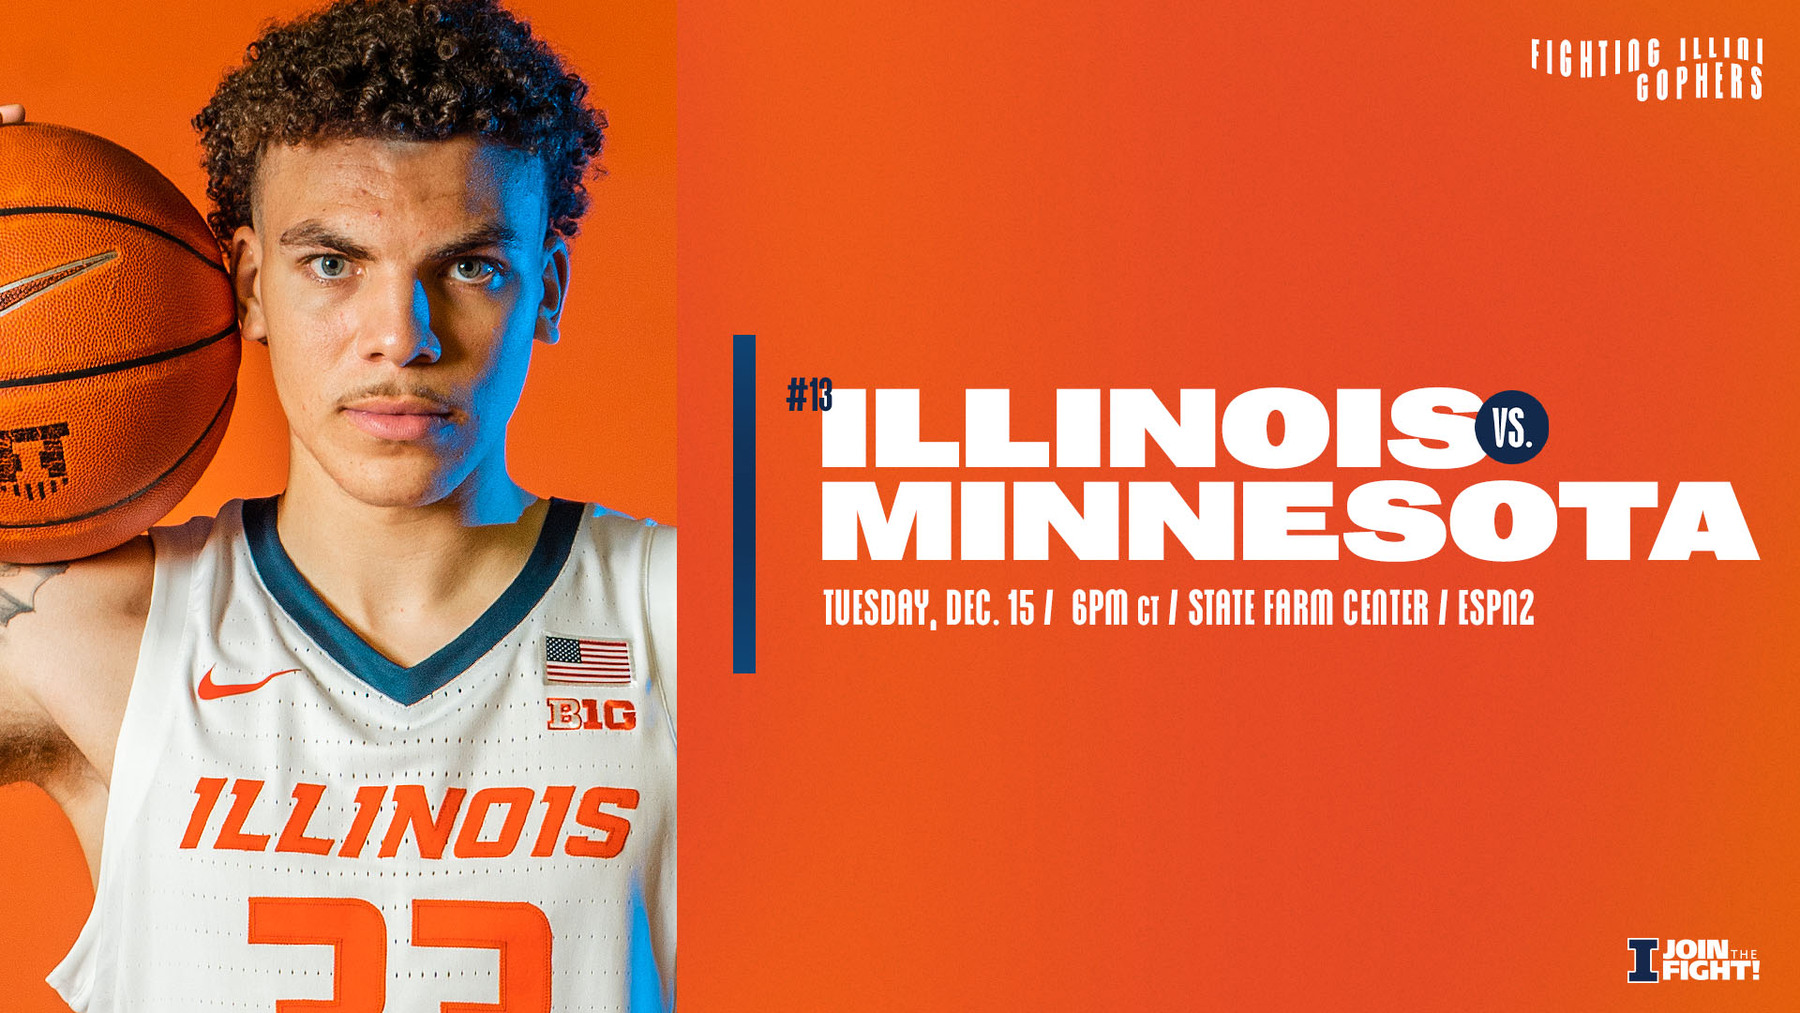 Freshman guard Adam Miller is featured on the graphic advertising tonight's game